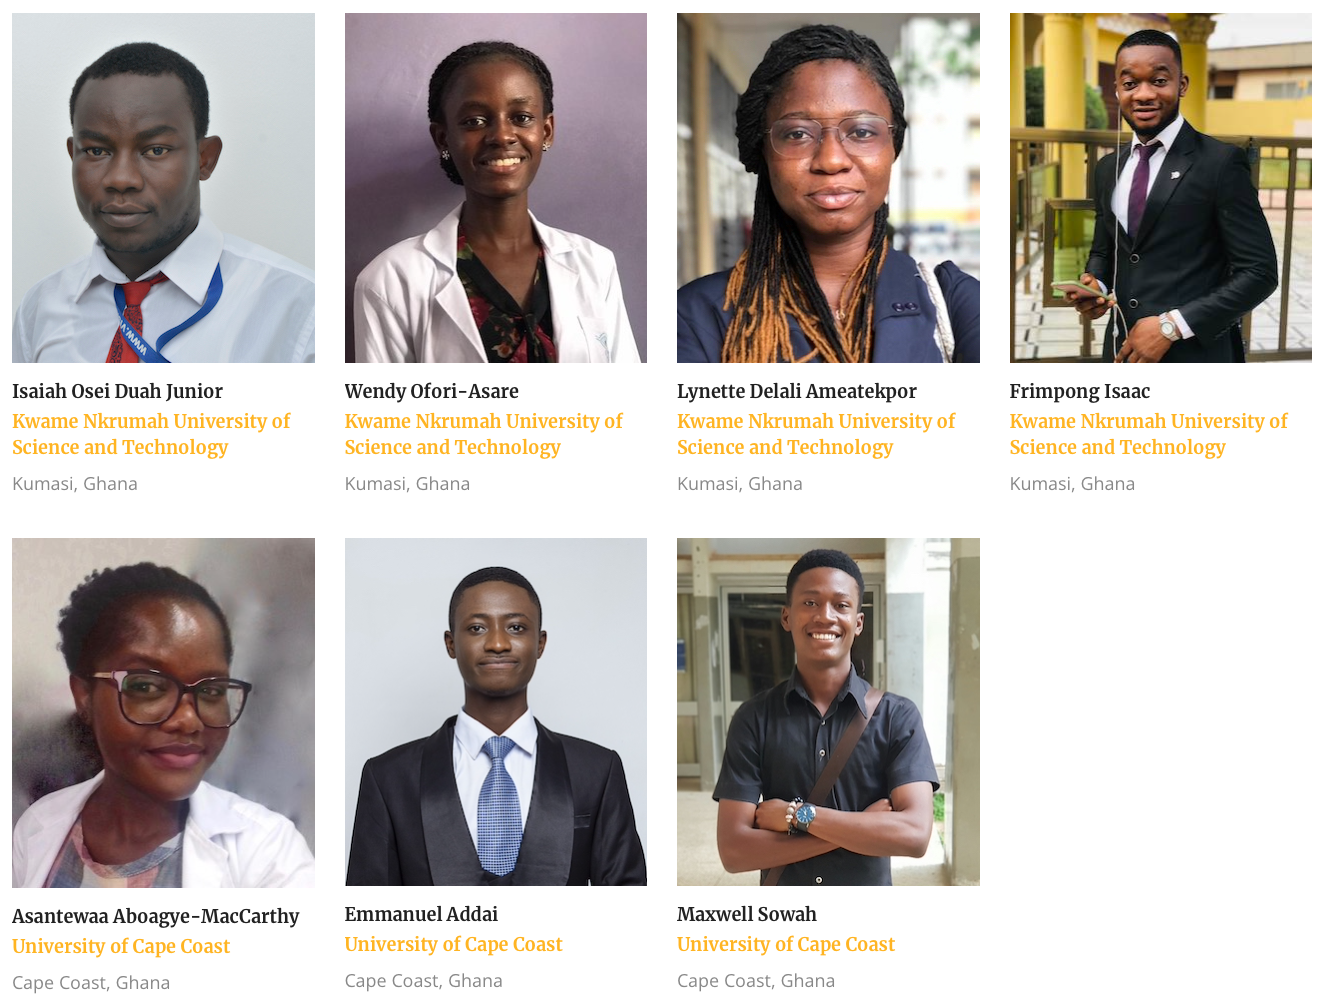 The 2021 Frans Oosterhof Conference Grant To Attend The BCLA Was Awarded To 7 Ghanaian Optometry Students